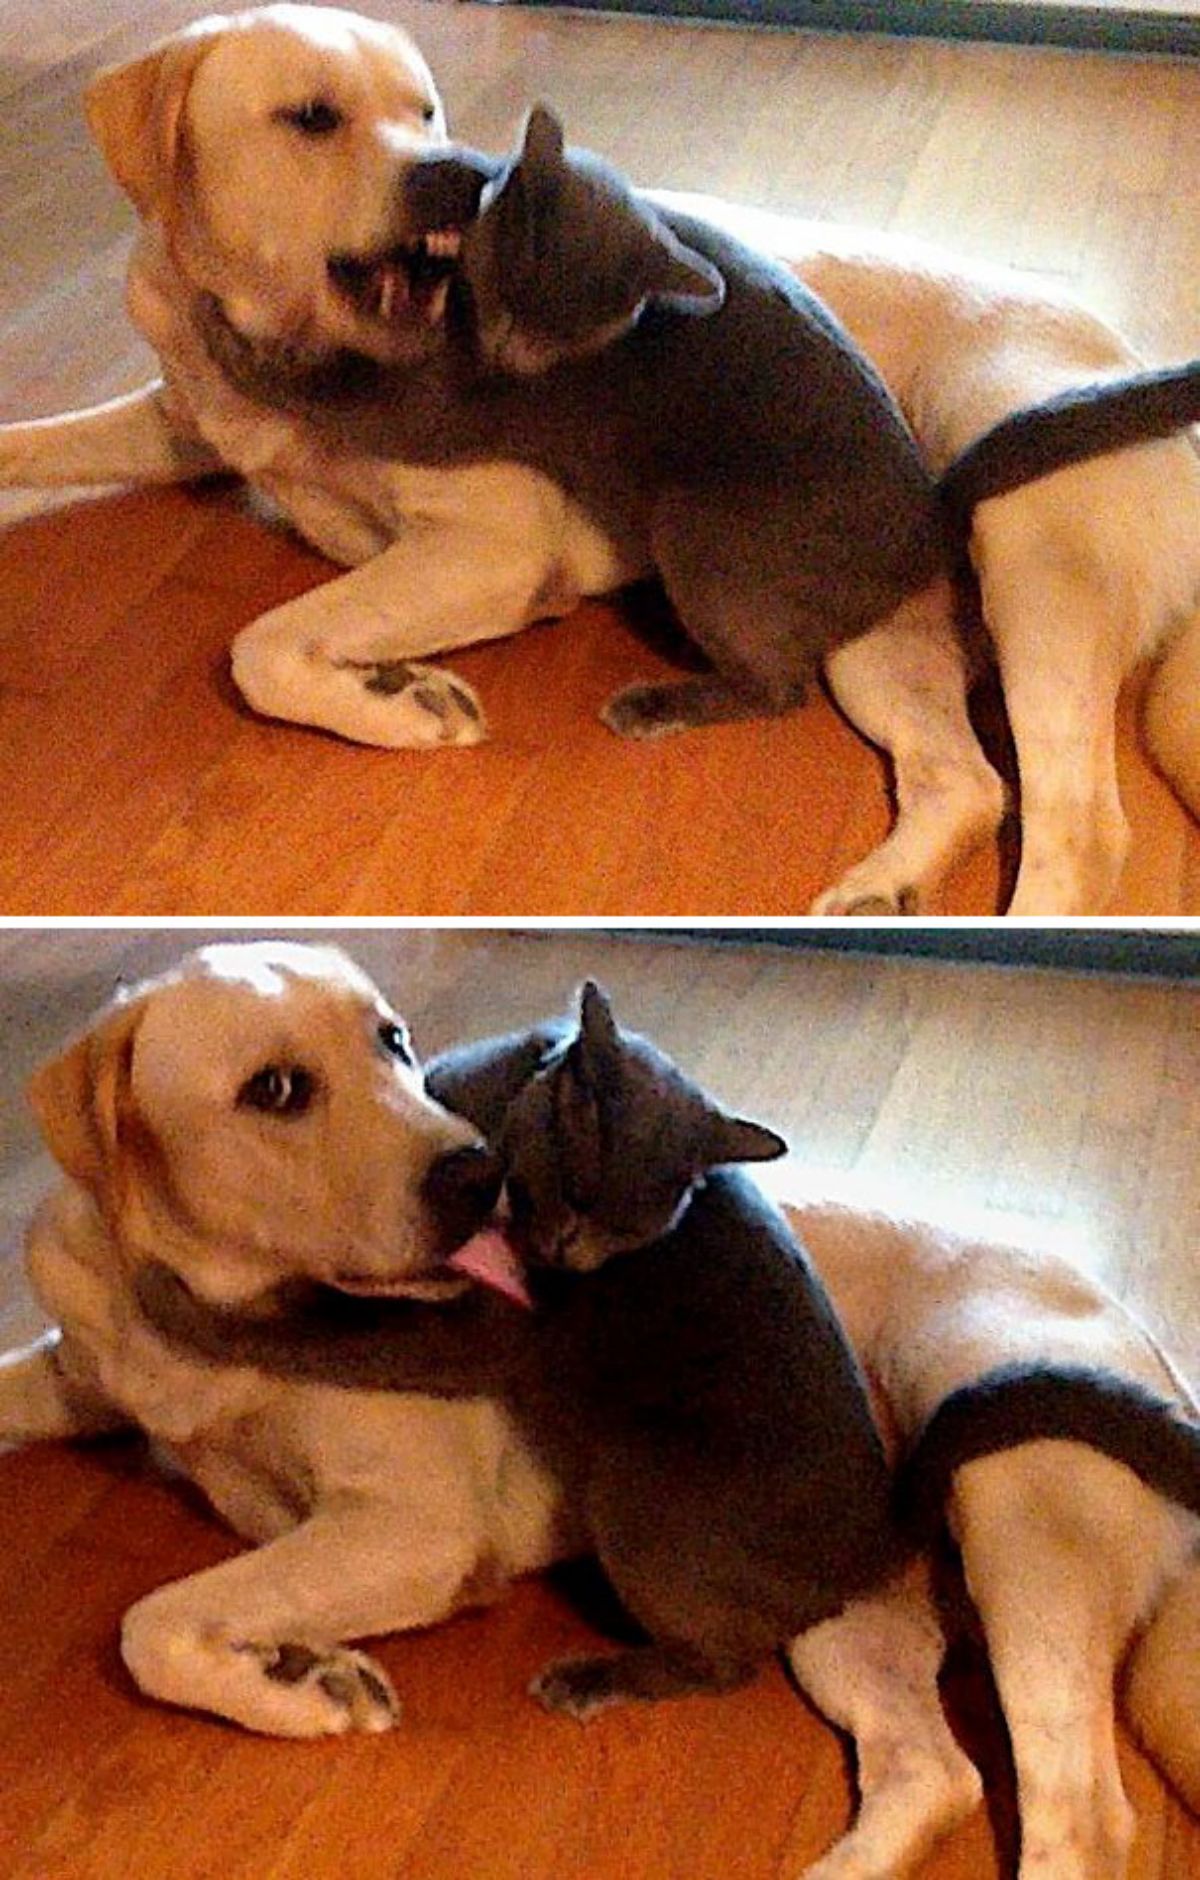 one photo of a yellow labrador retriever fighting with a grey cat and one photo of the dog licking the cat